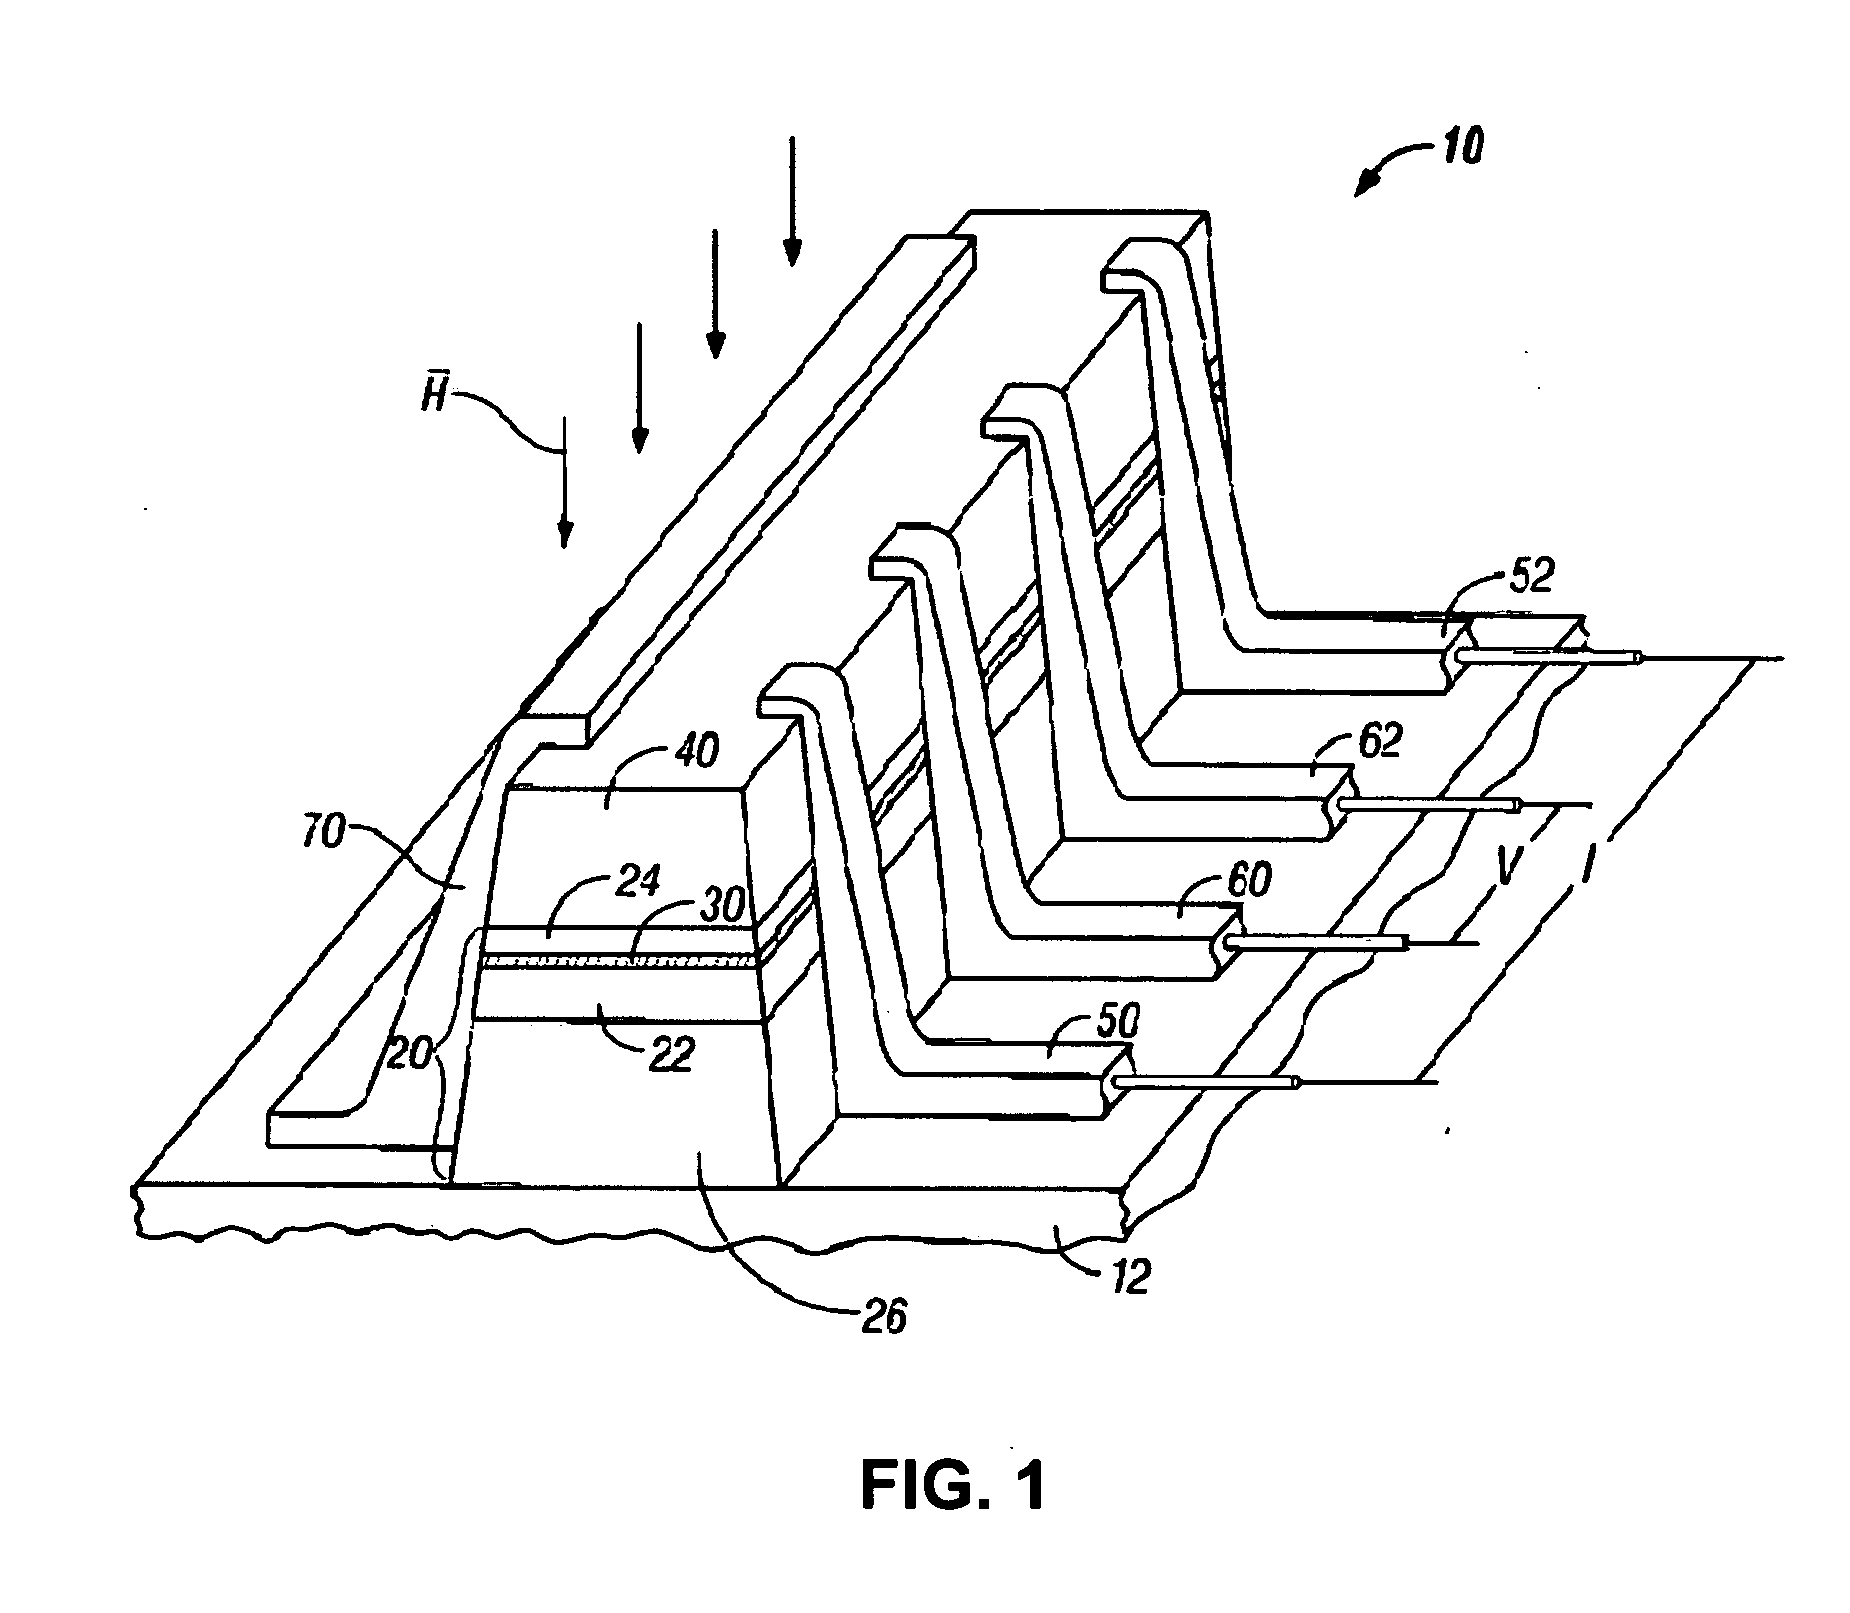 Positioning of a magnetic head in a magnetic data recording device using a multiple sensor array